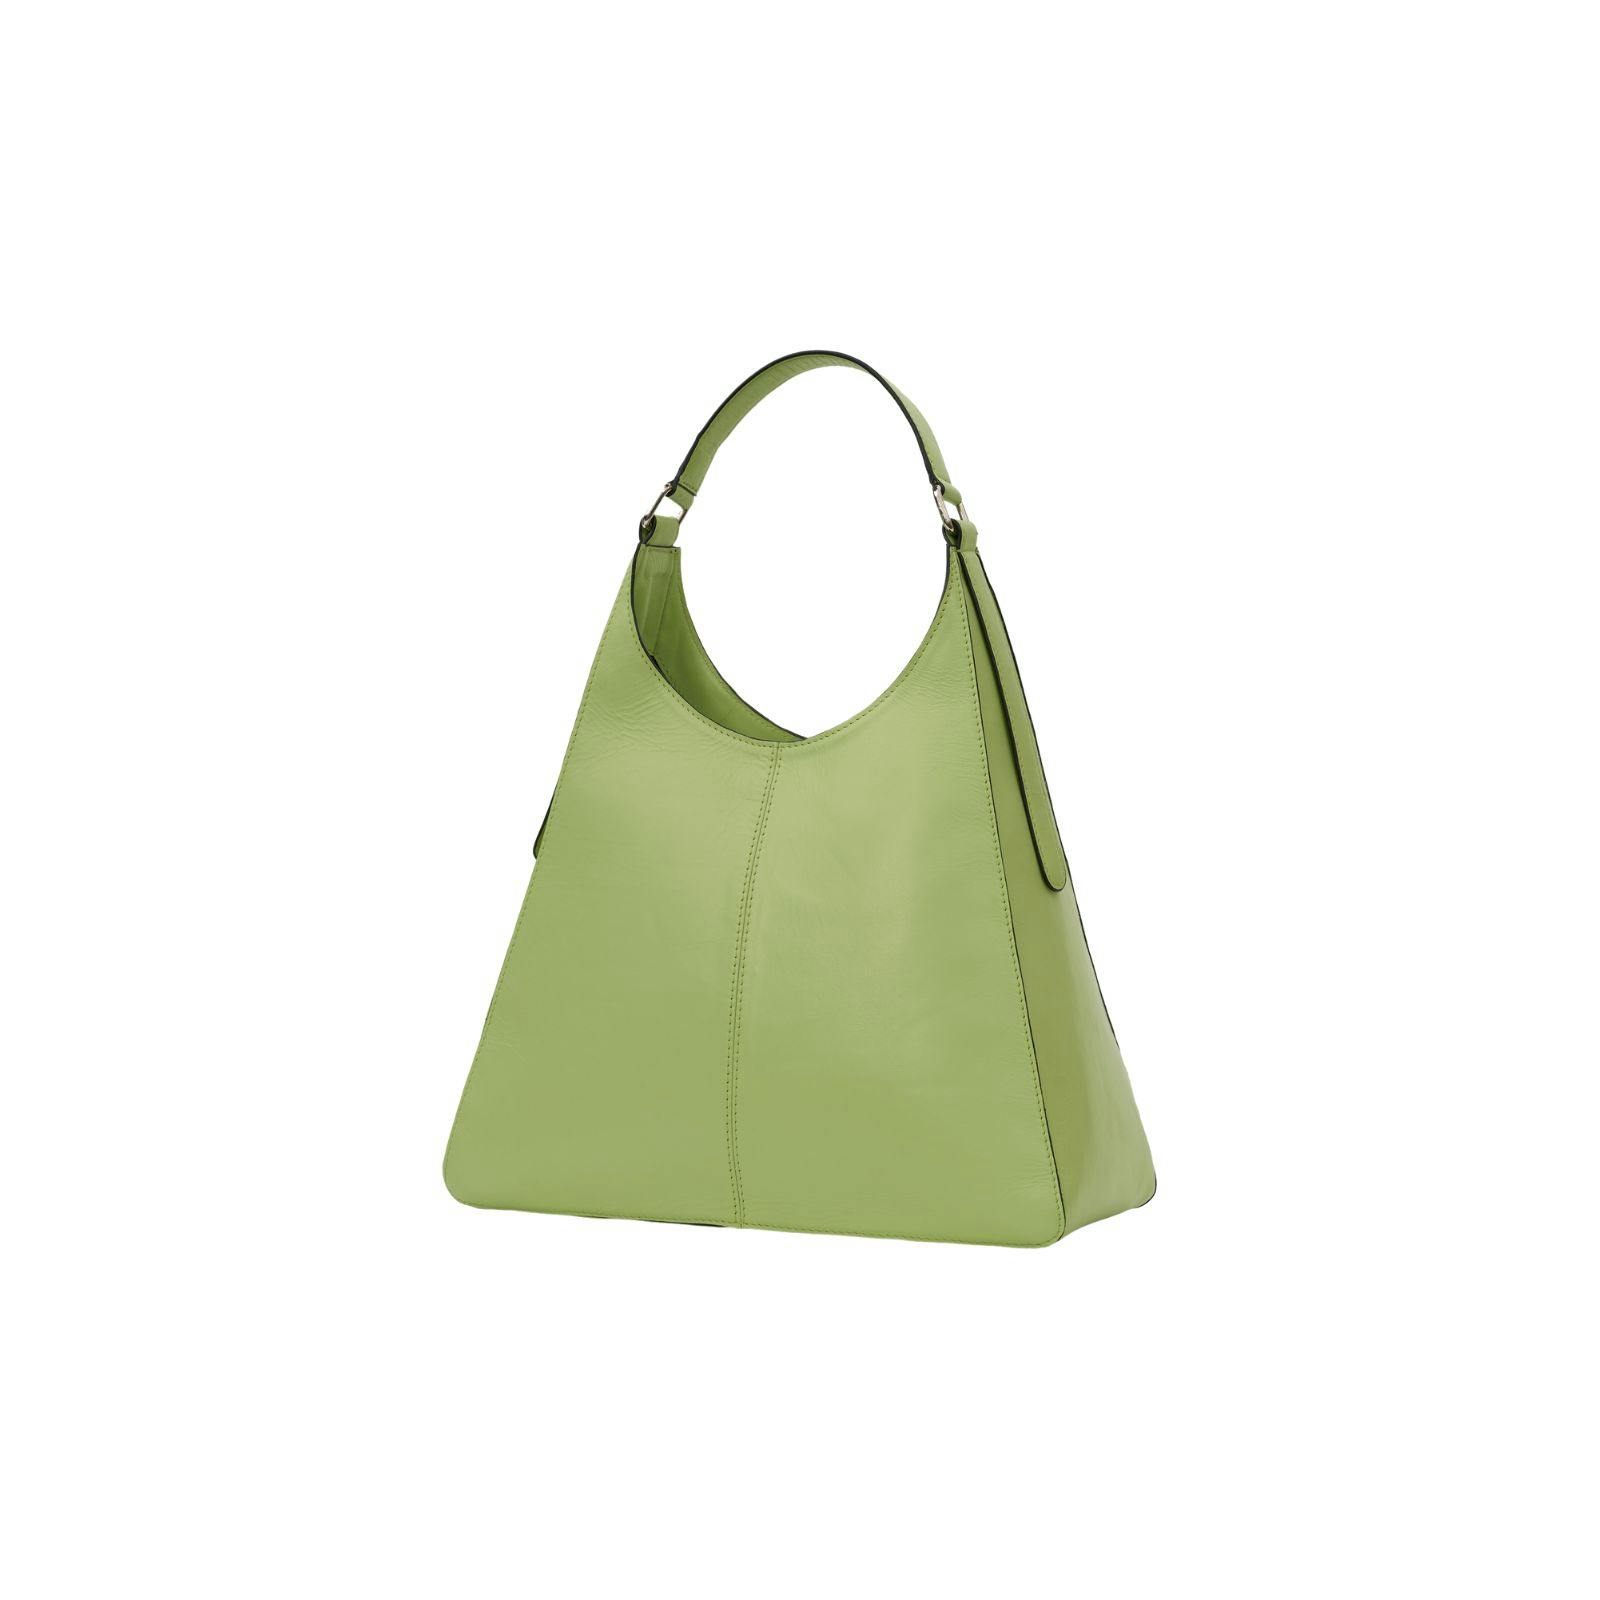 Cara in Pastel Green, a product by Mistry 